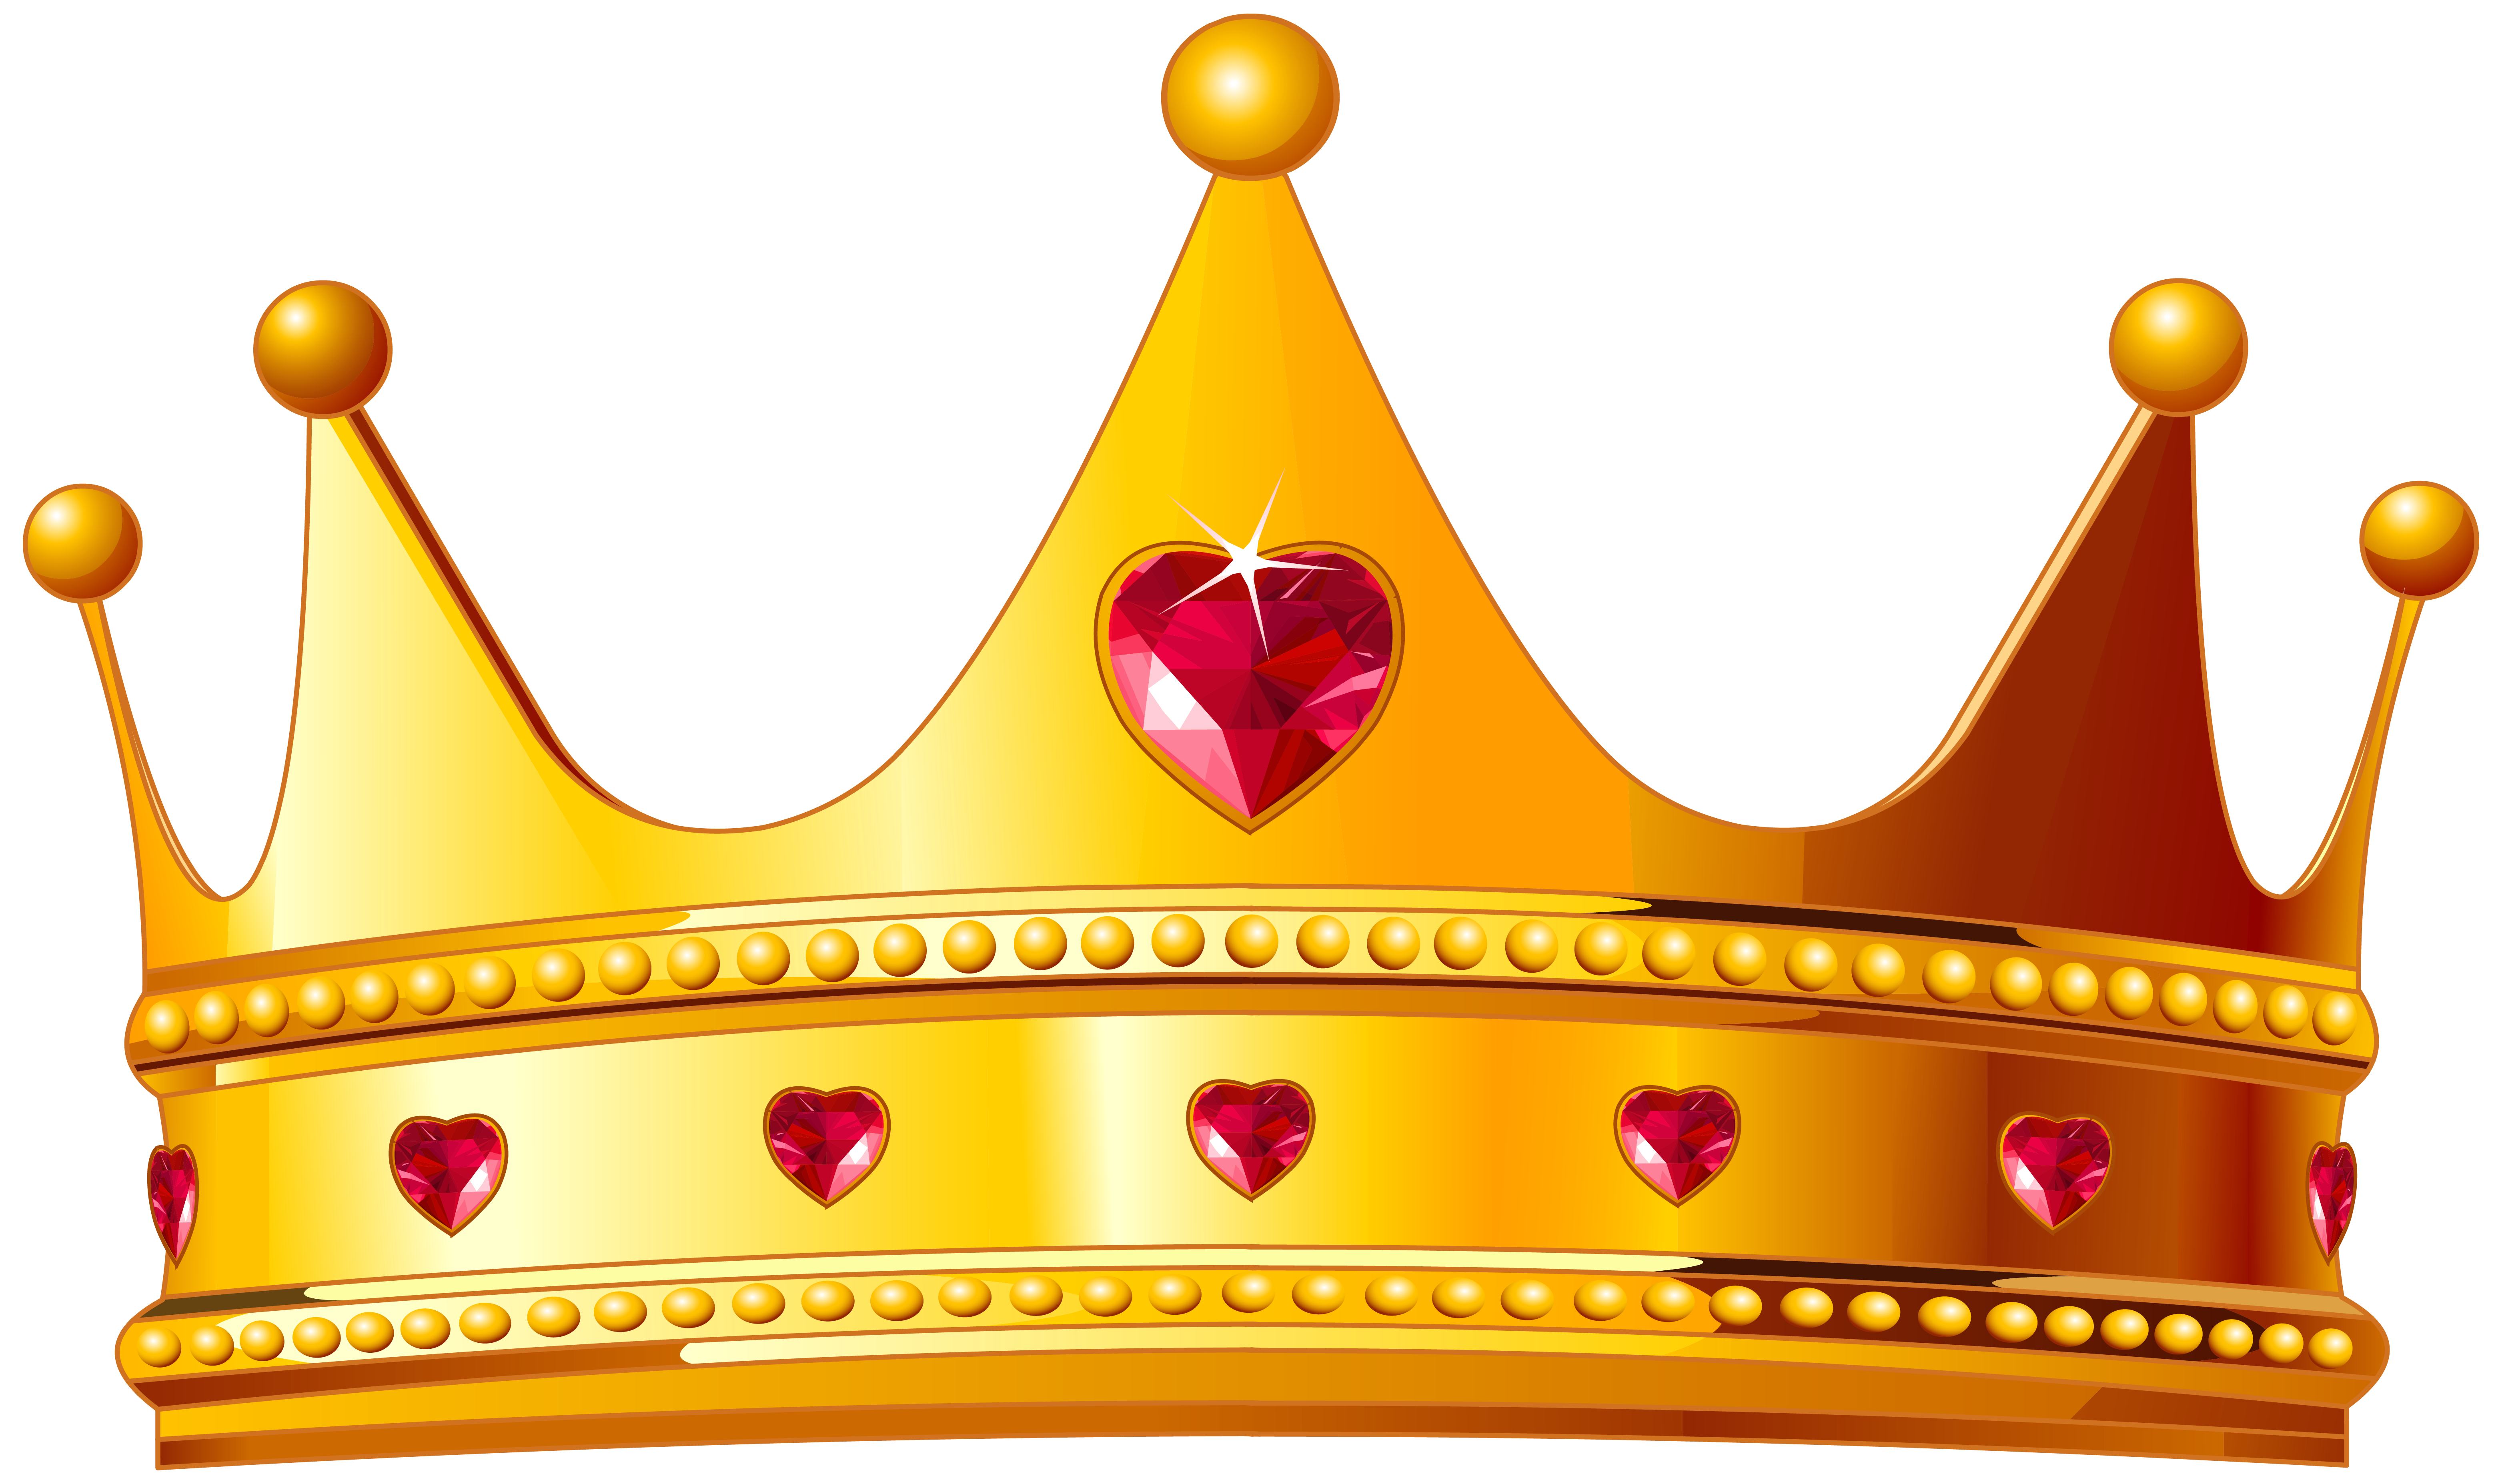 Golden with hearts png. Crown clip art beauty queen crown